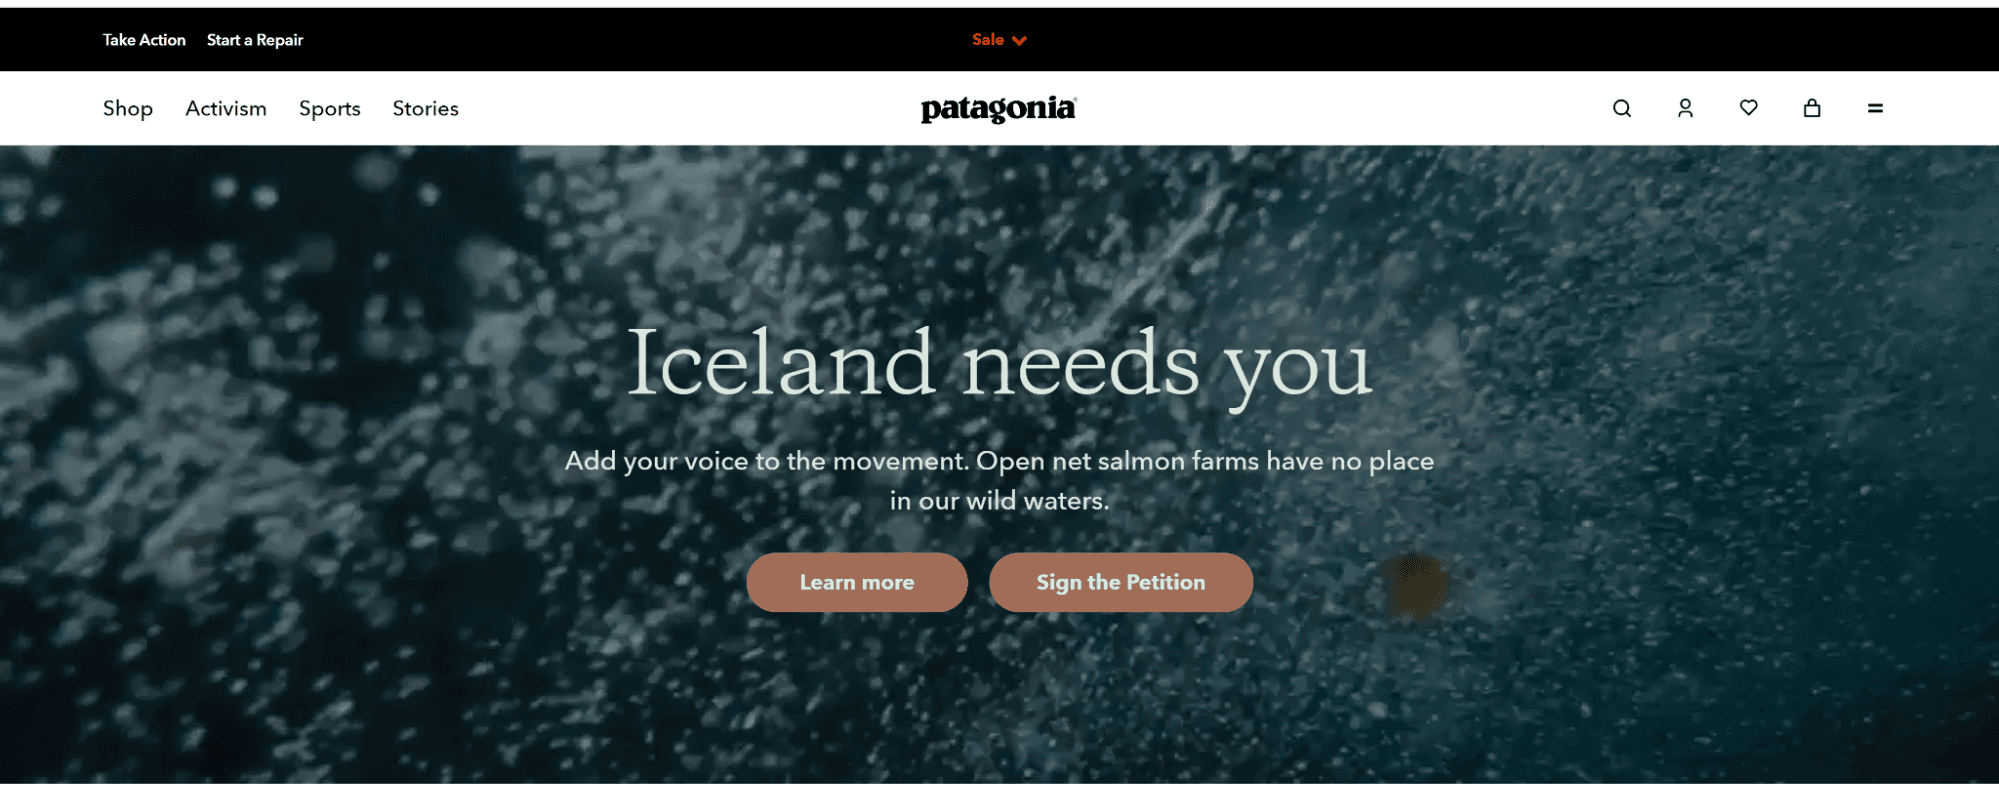 Patagonia's European-based home page